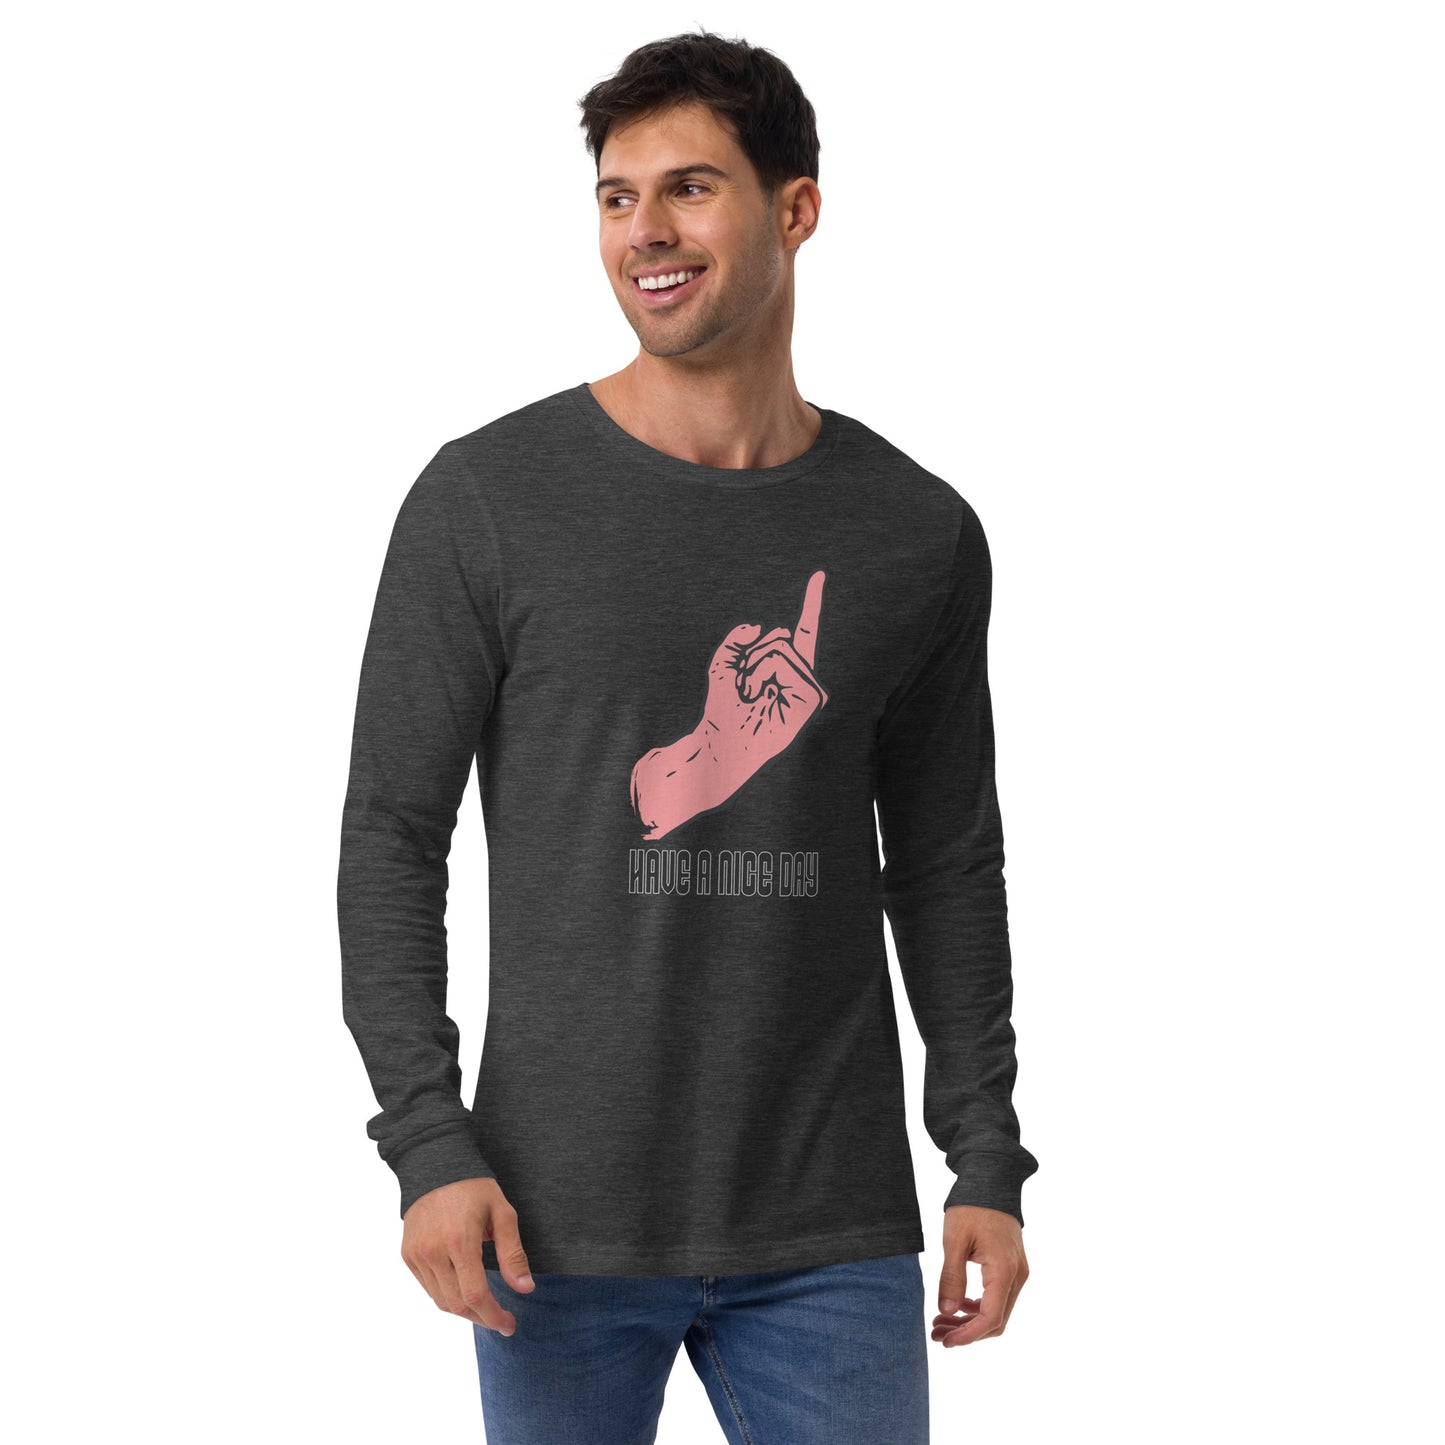 Have a Nice Day Unisex Long Sleeve Shirt